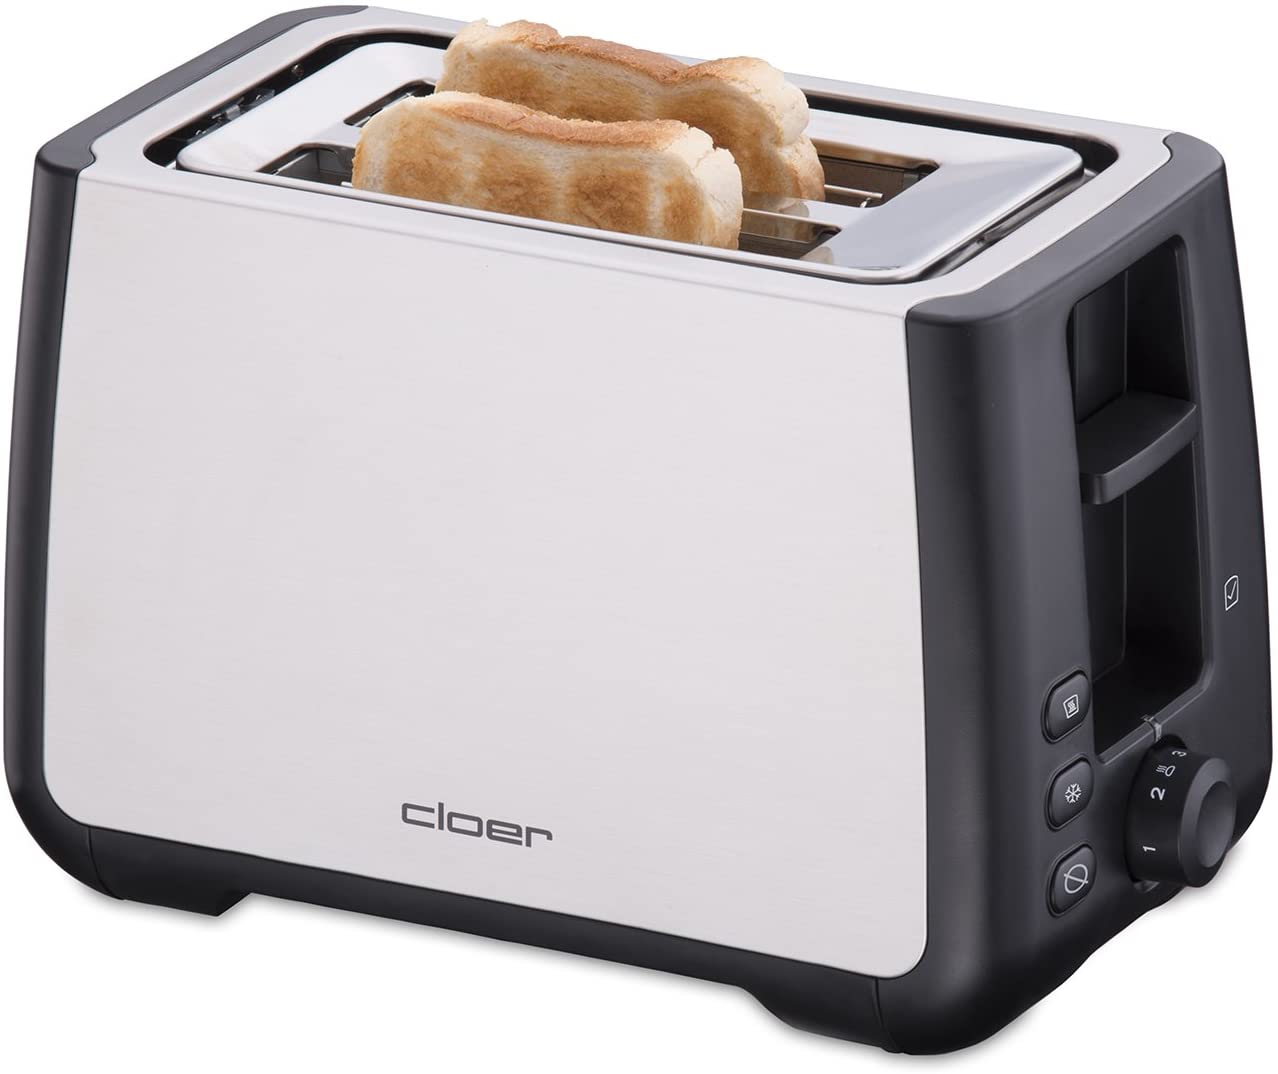 Cloer toaster 3569 1000W silver Tosteris